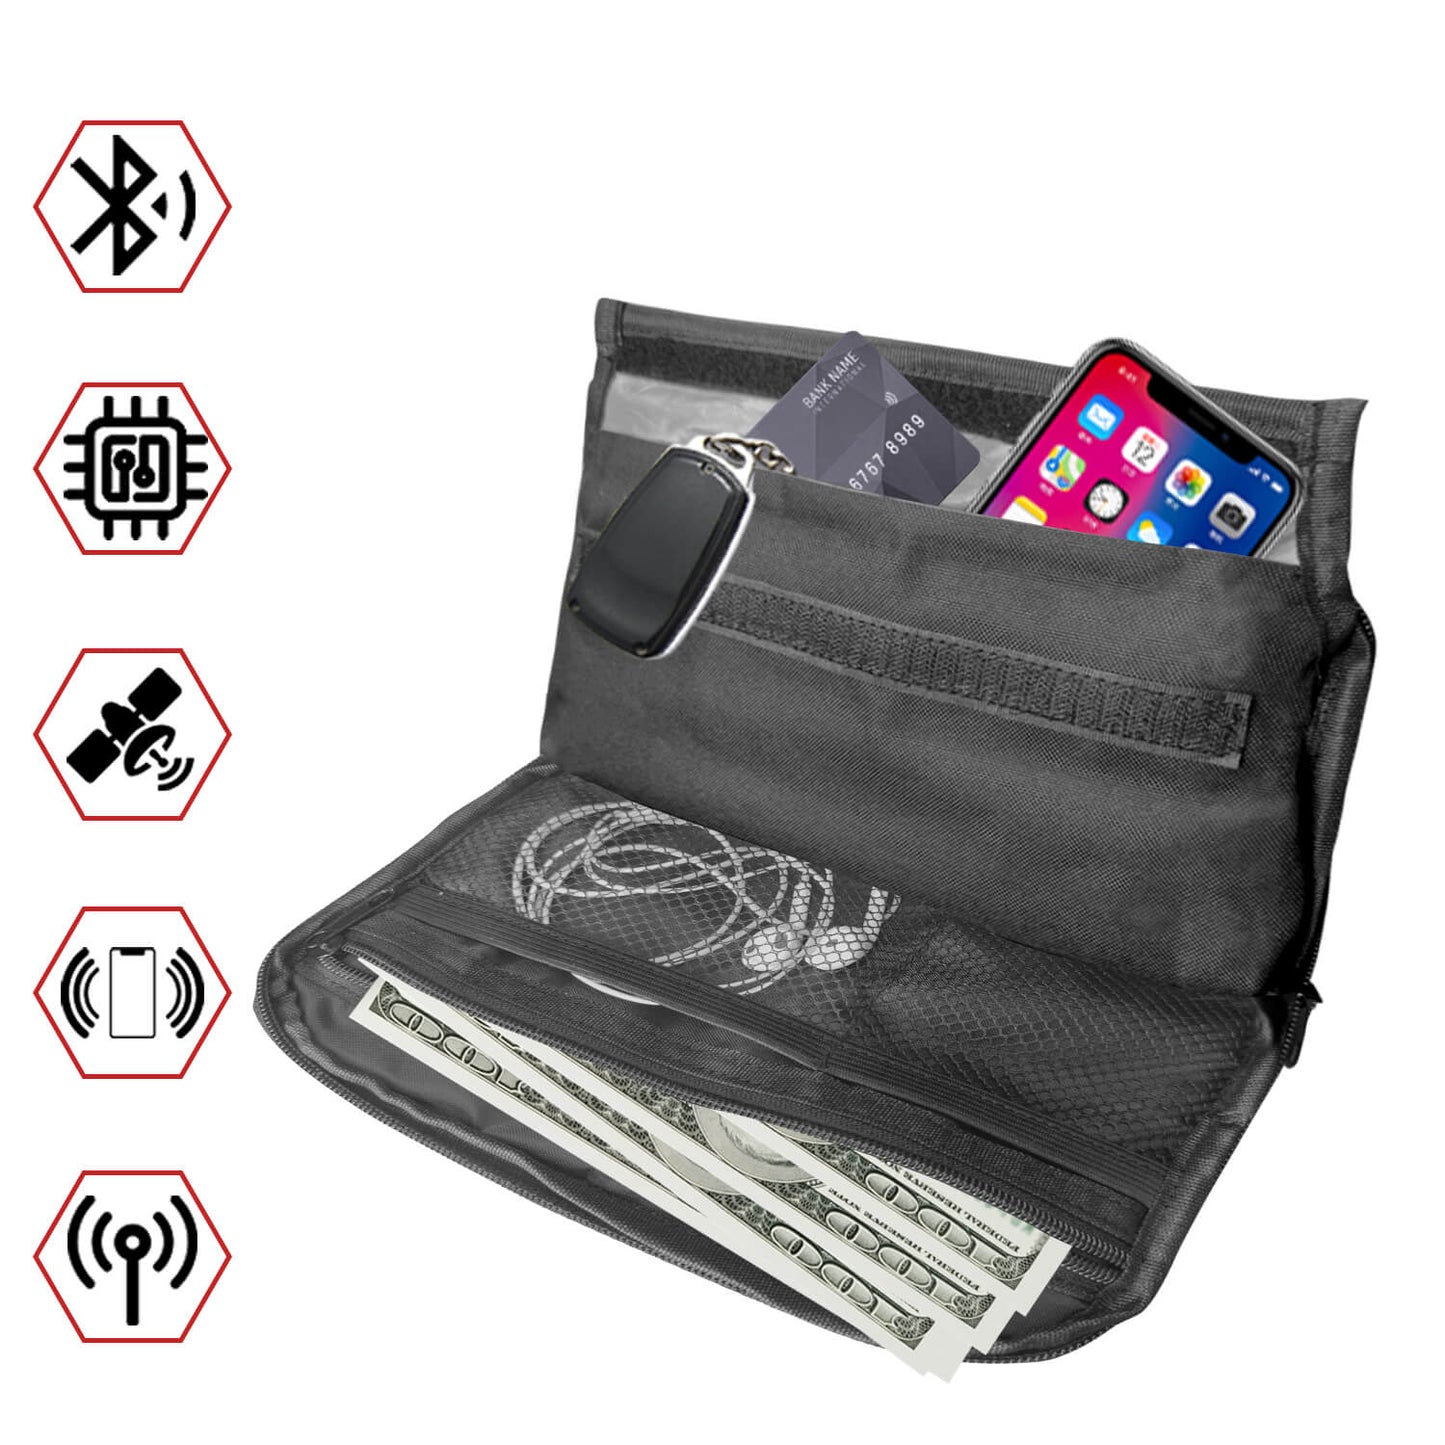 Faraday Bag for Phones, Key FOBs, and Credit Cards - Signal Blocking P –